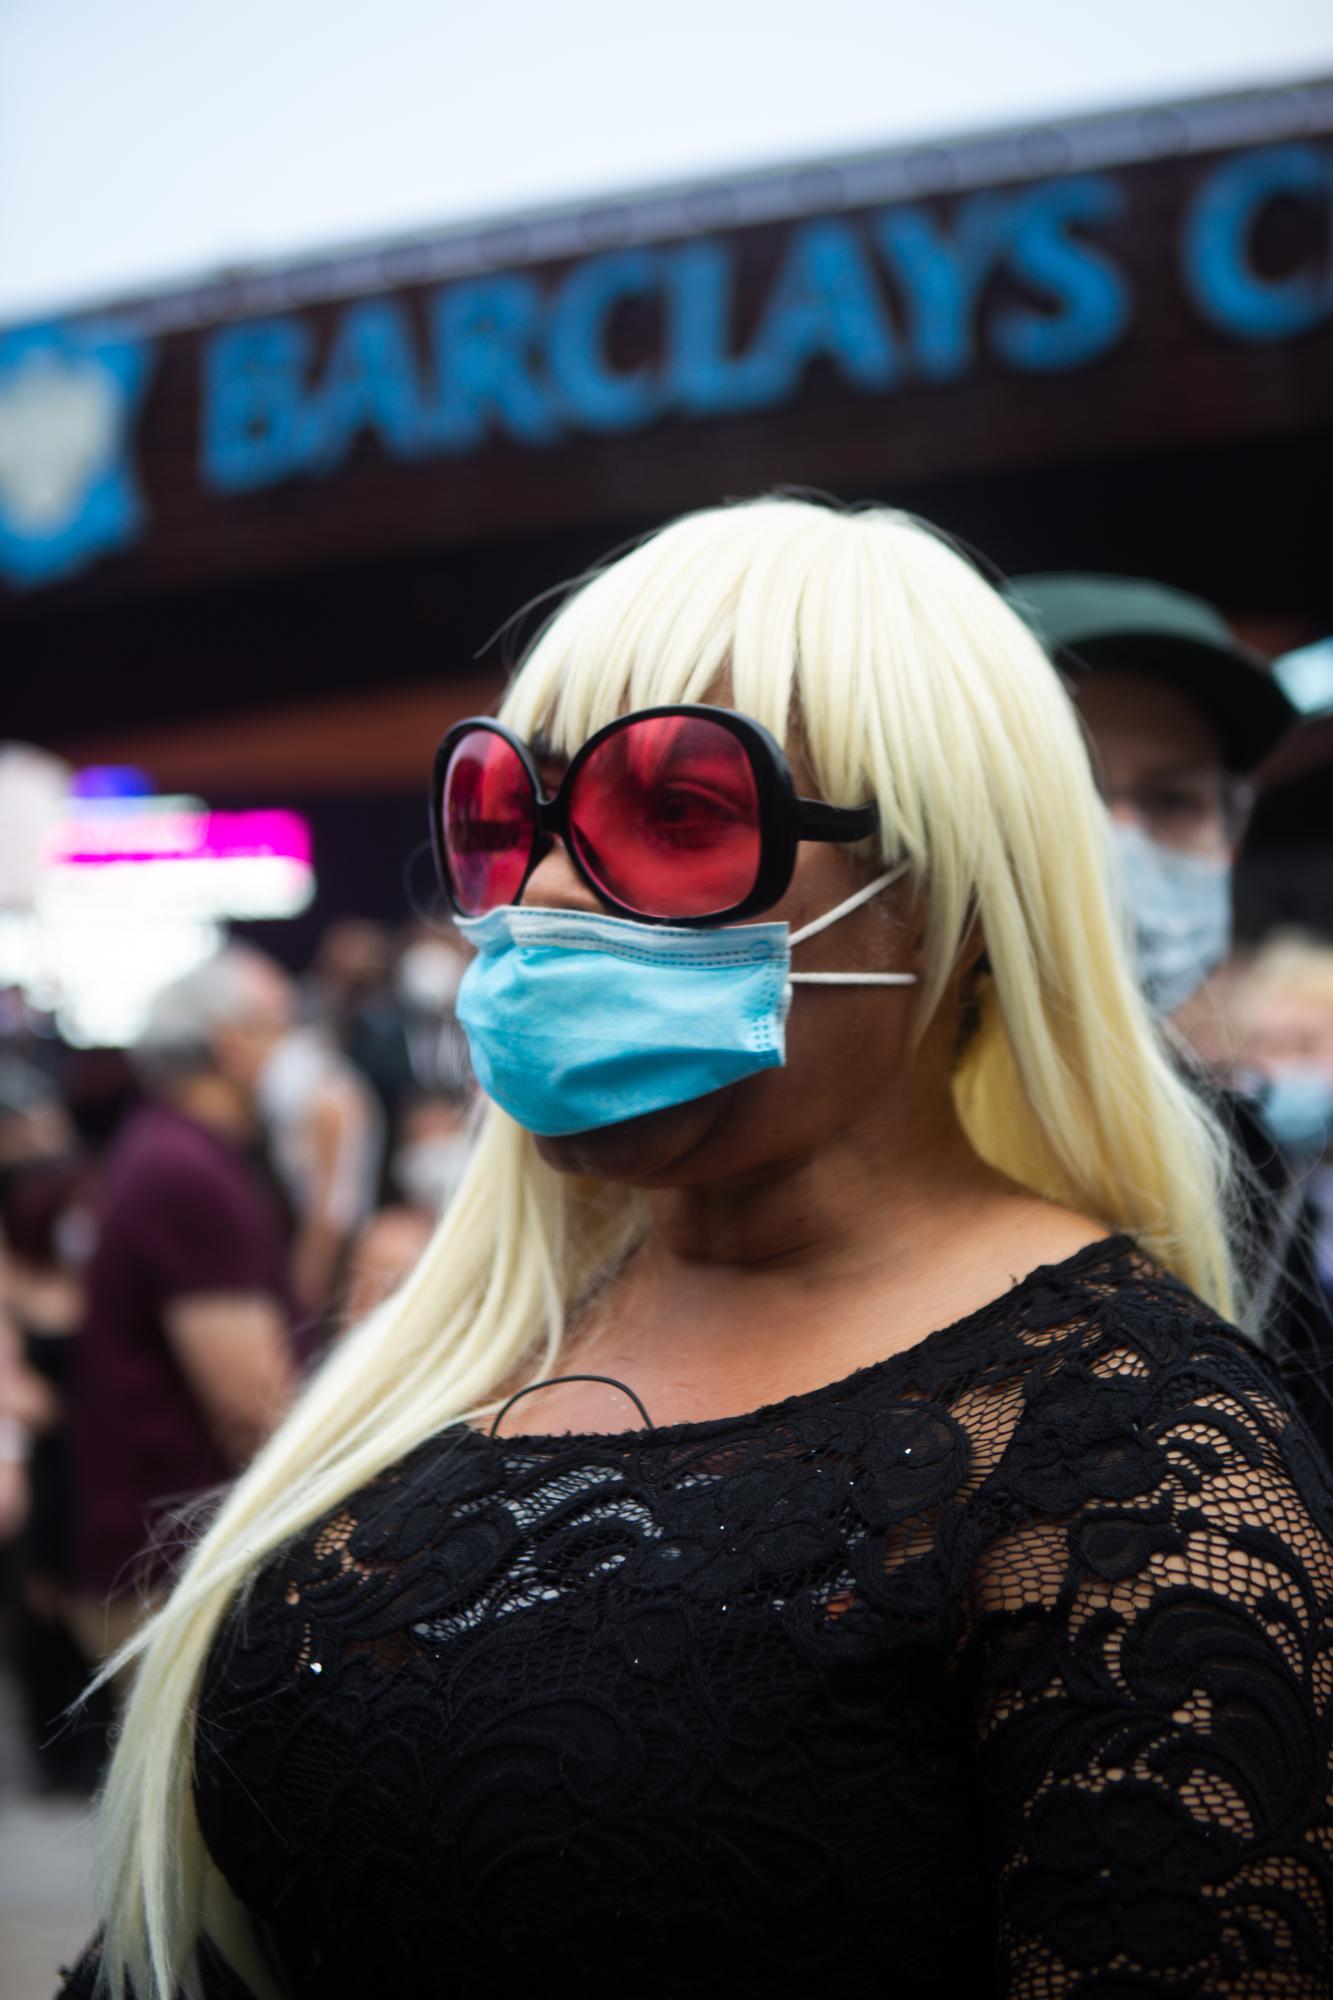 George Floyd Protests | Vice News  - BROOKLYN, NY - May 29, 2020: A woman by the name of Miss...